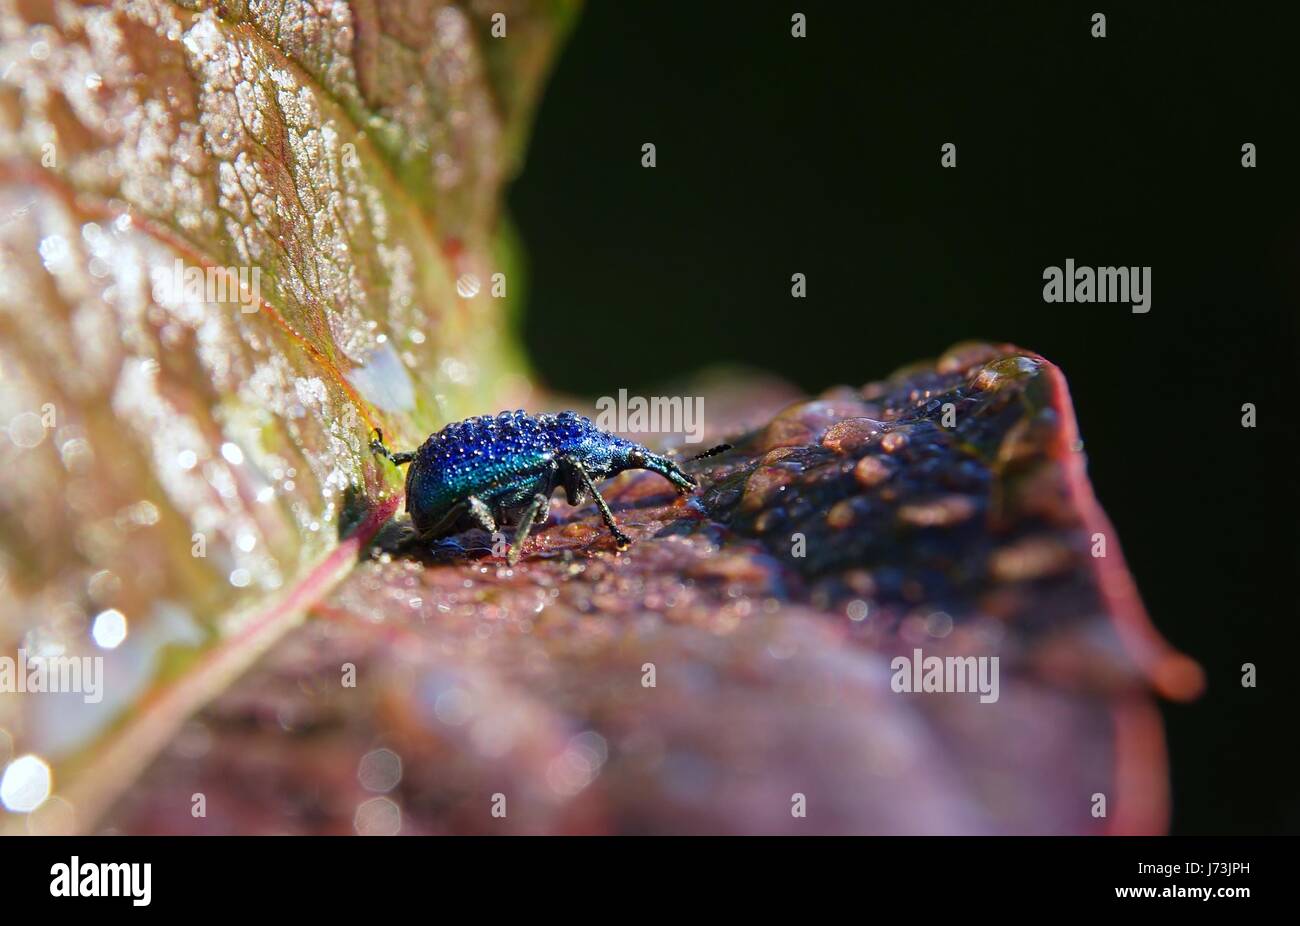 weevil with drops on the back Stock Photo